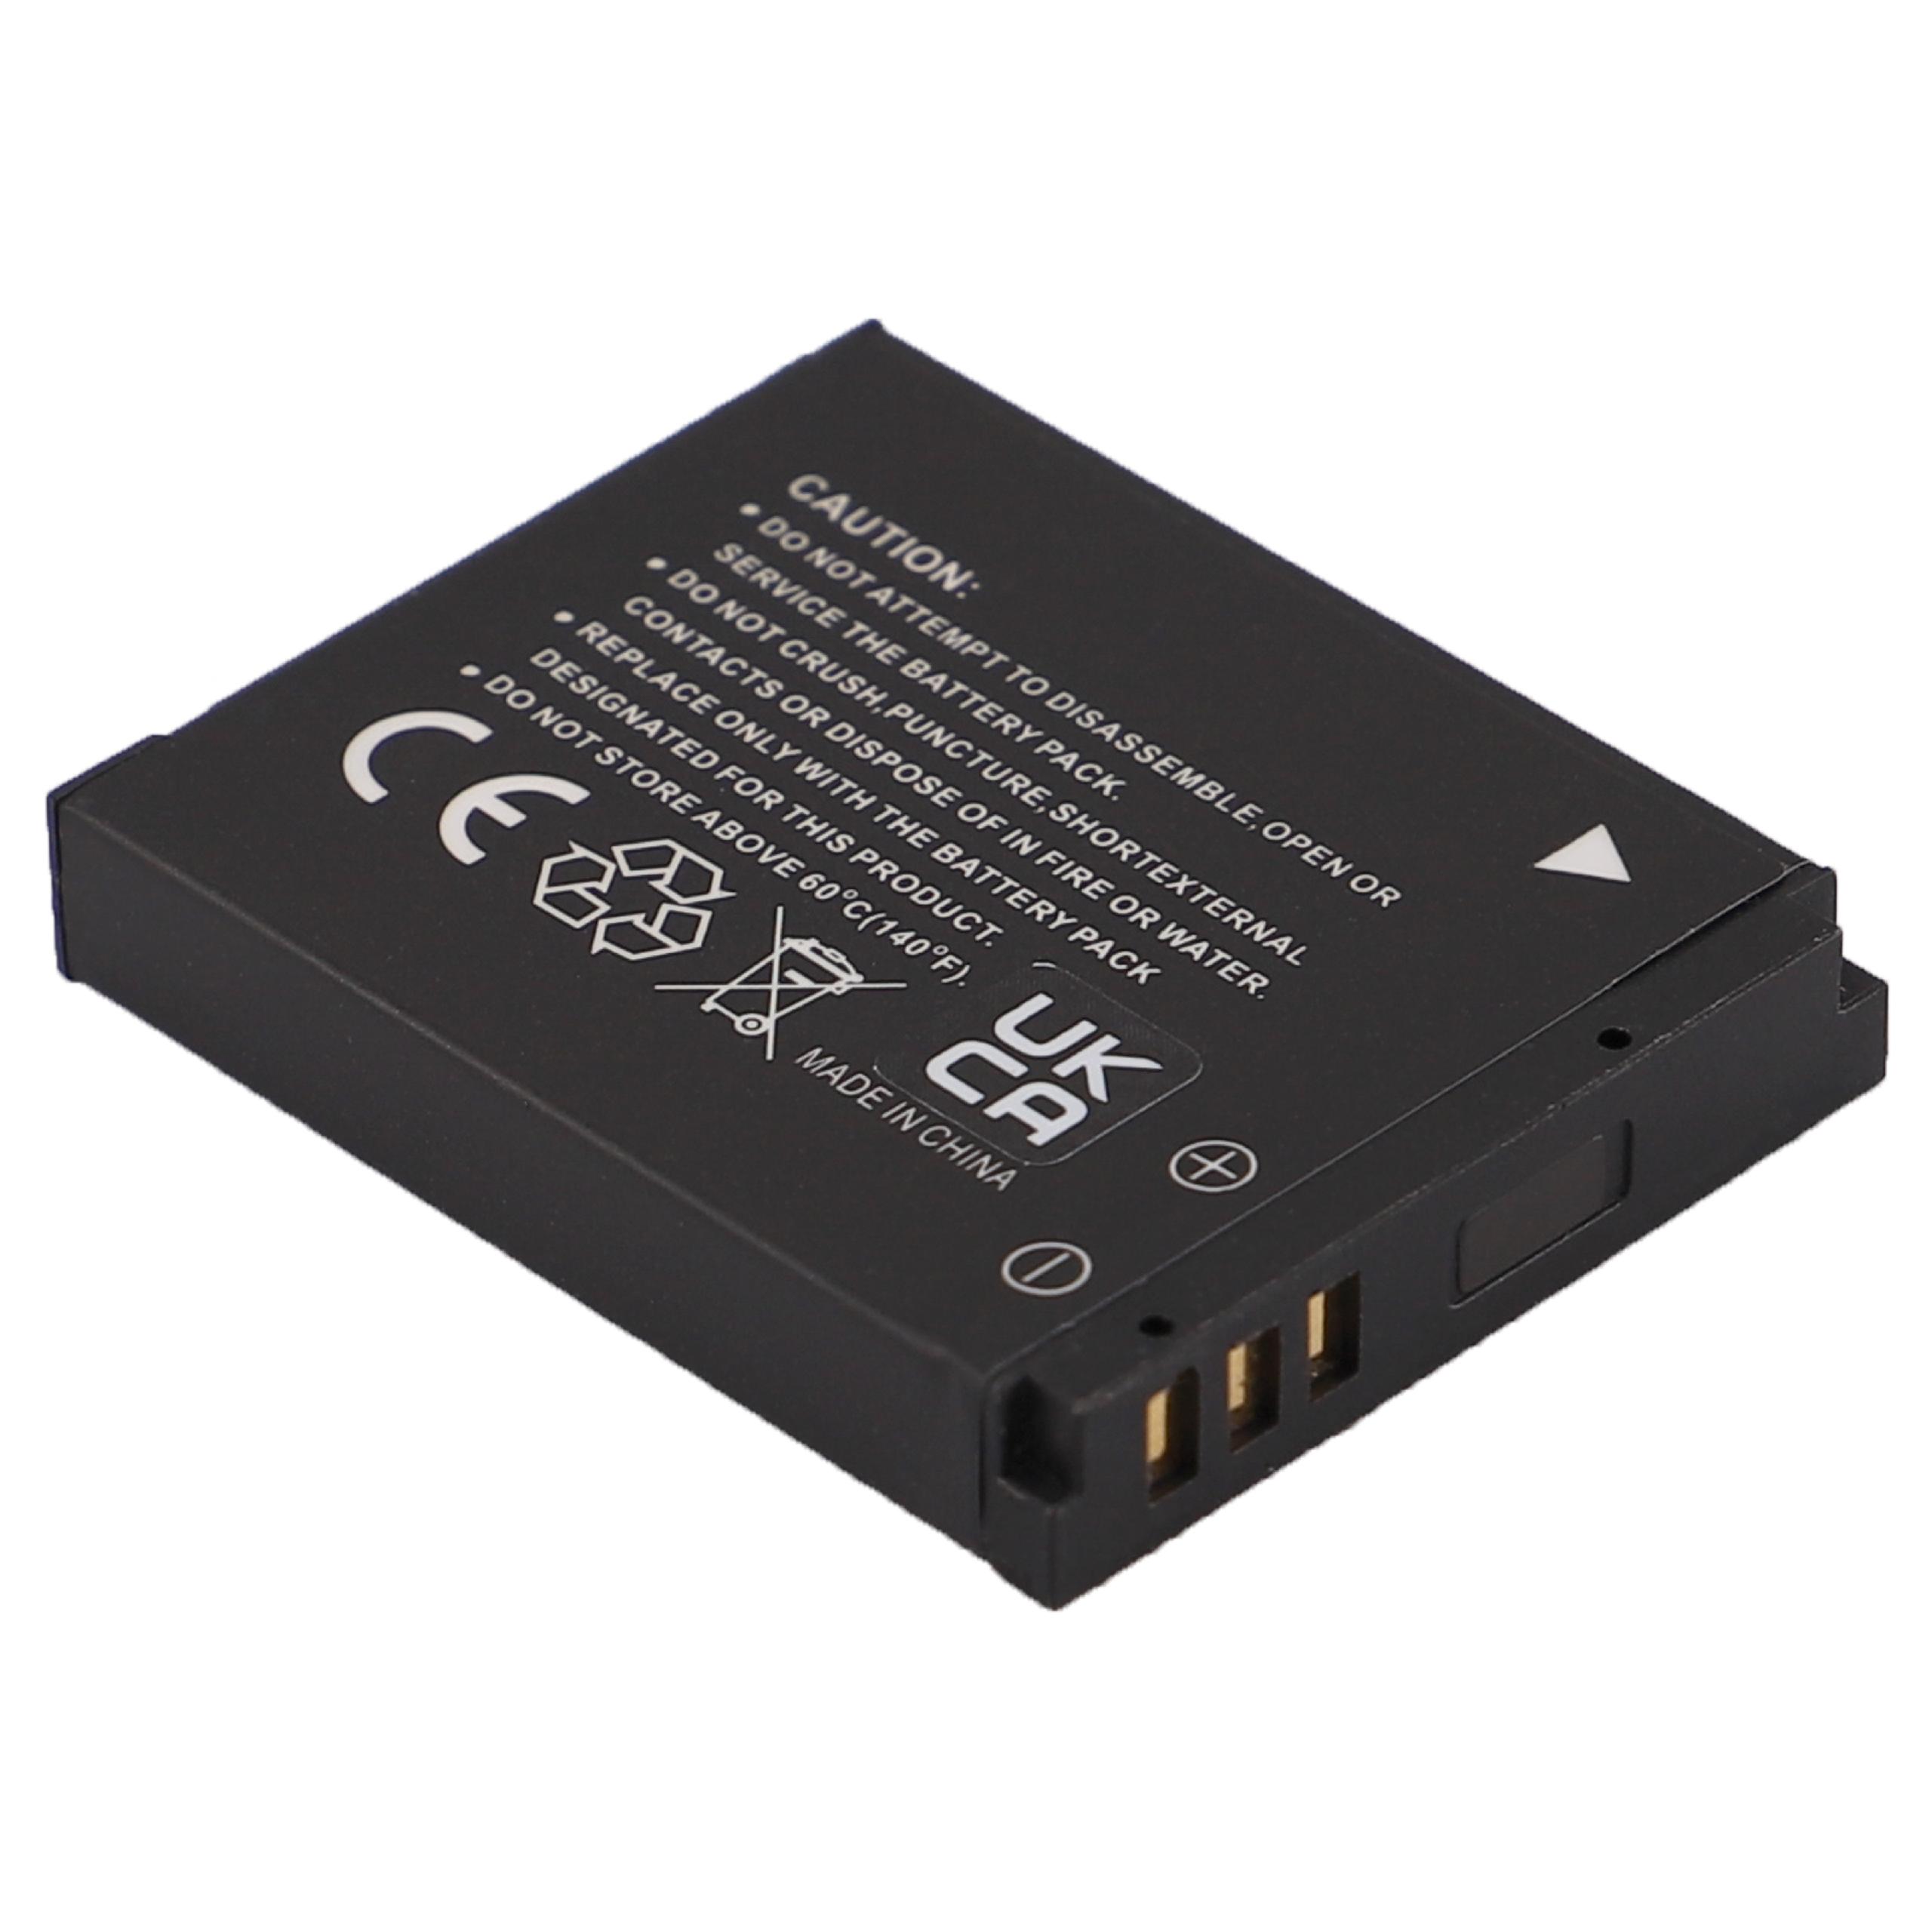 Battery Replacement for Canon NB-6L - 1000mAh, 3.7V, Li-Ion